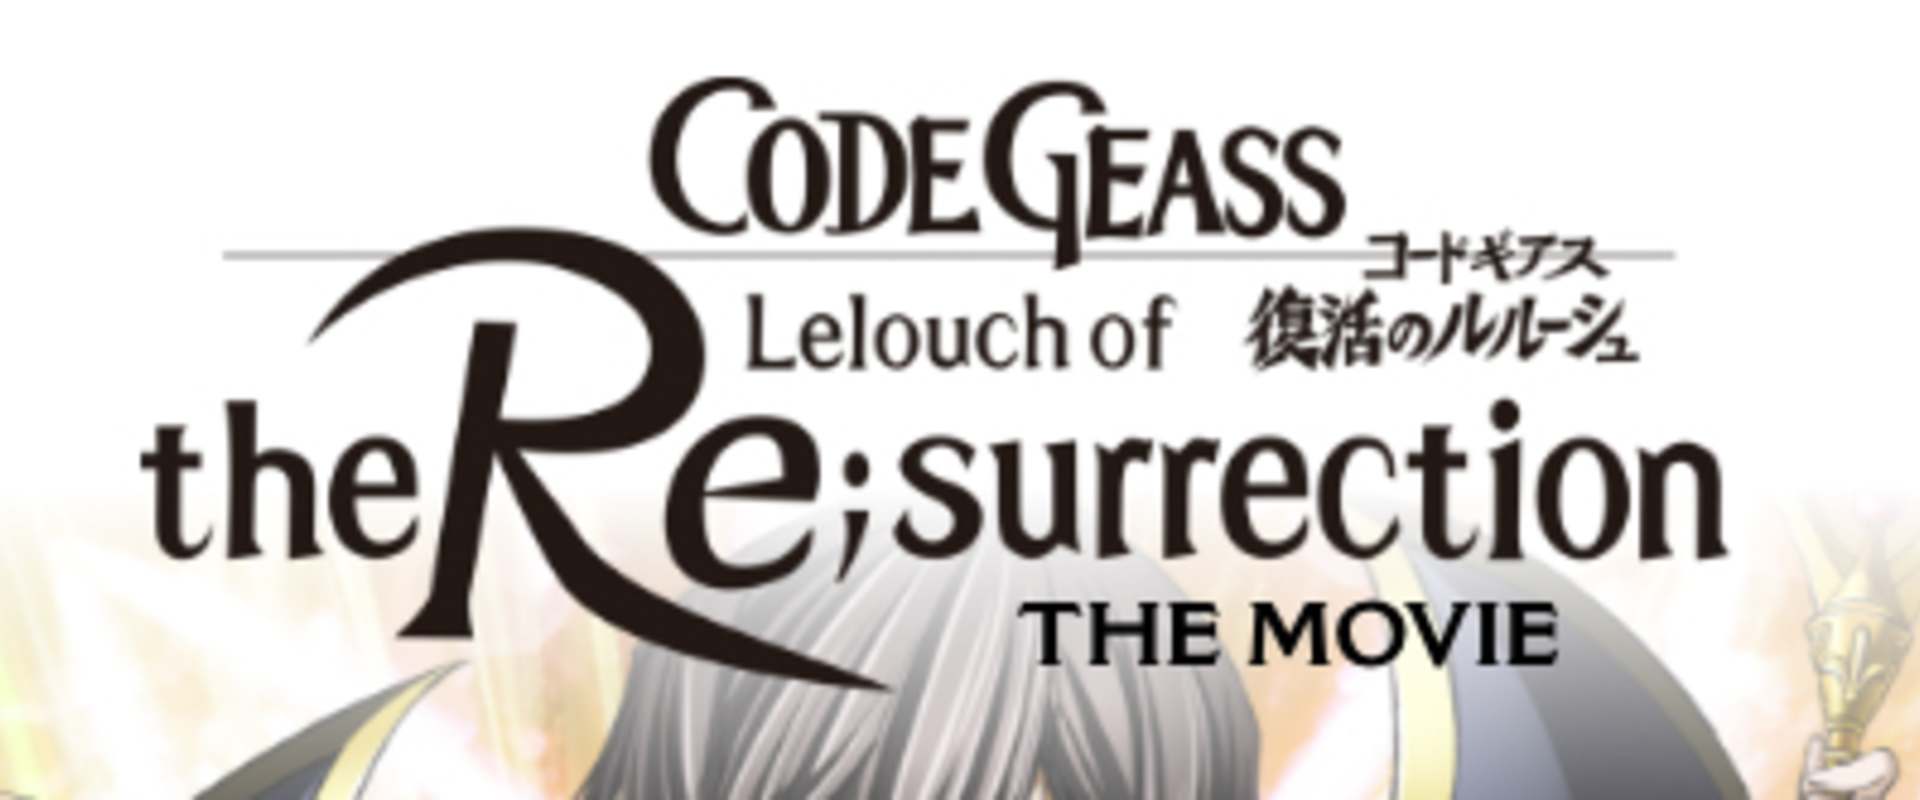 Code Geass: Lelouch of the Re;Surrection background 1